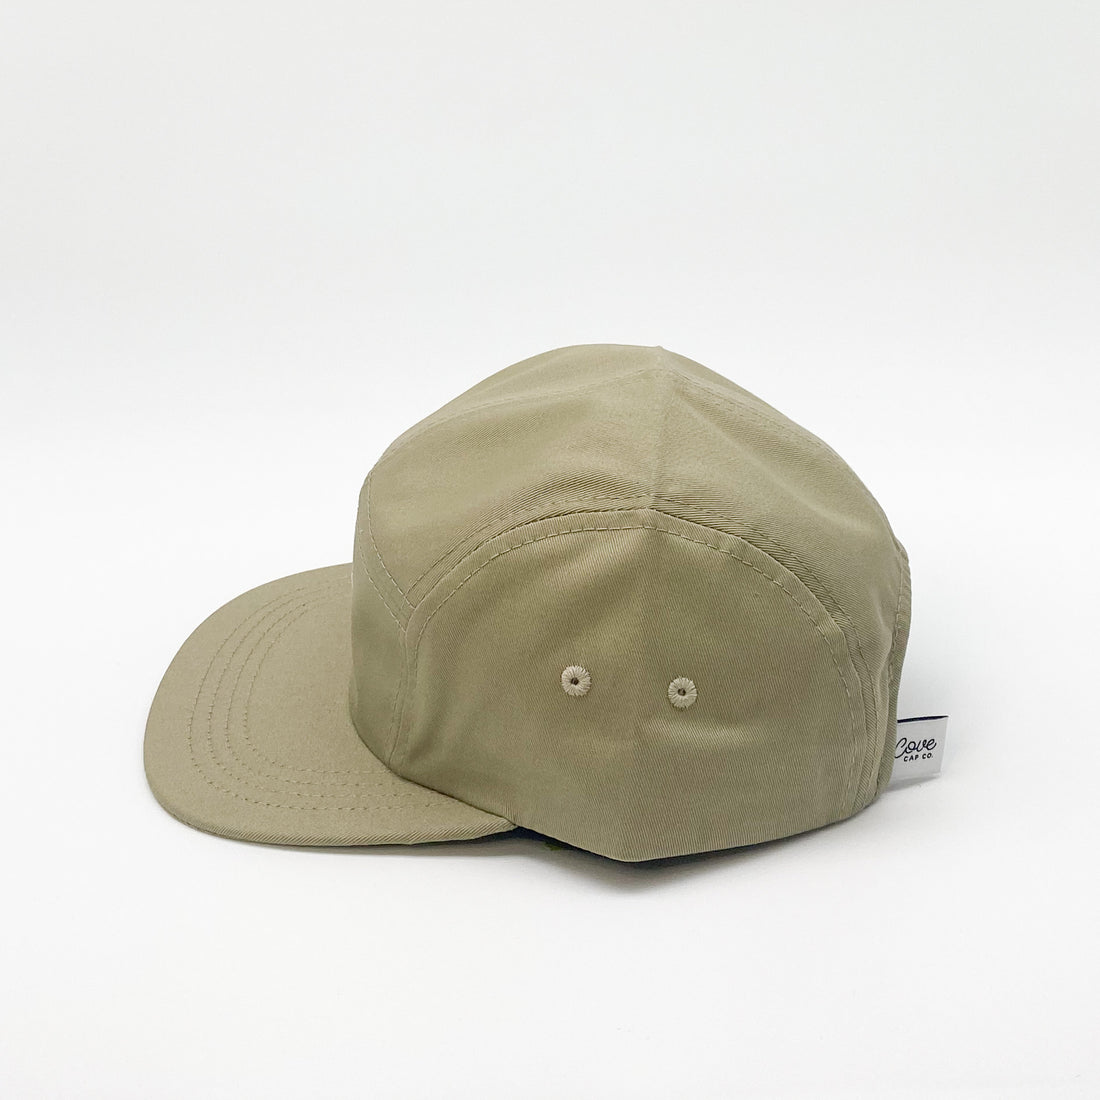 Side profile of a khaki green adult hat. Minimalist five-panel design, made in Canada out of organic cotton. Hat has an adjustable soft velcro closure and two eyelets on each side. 